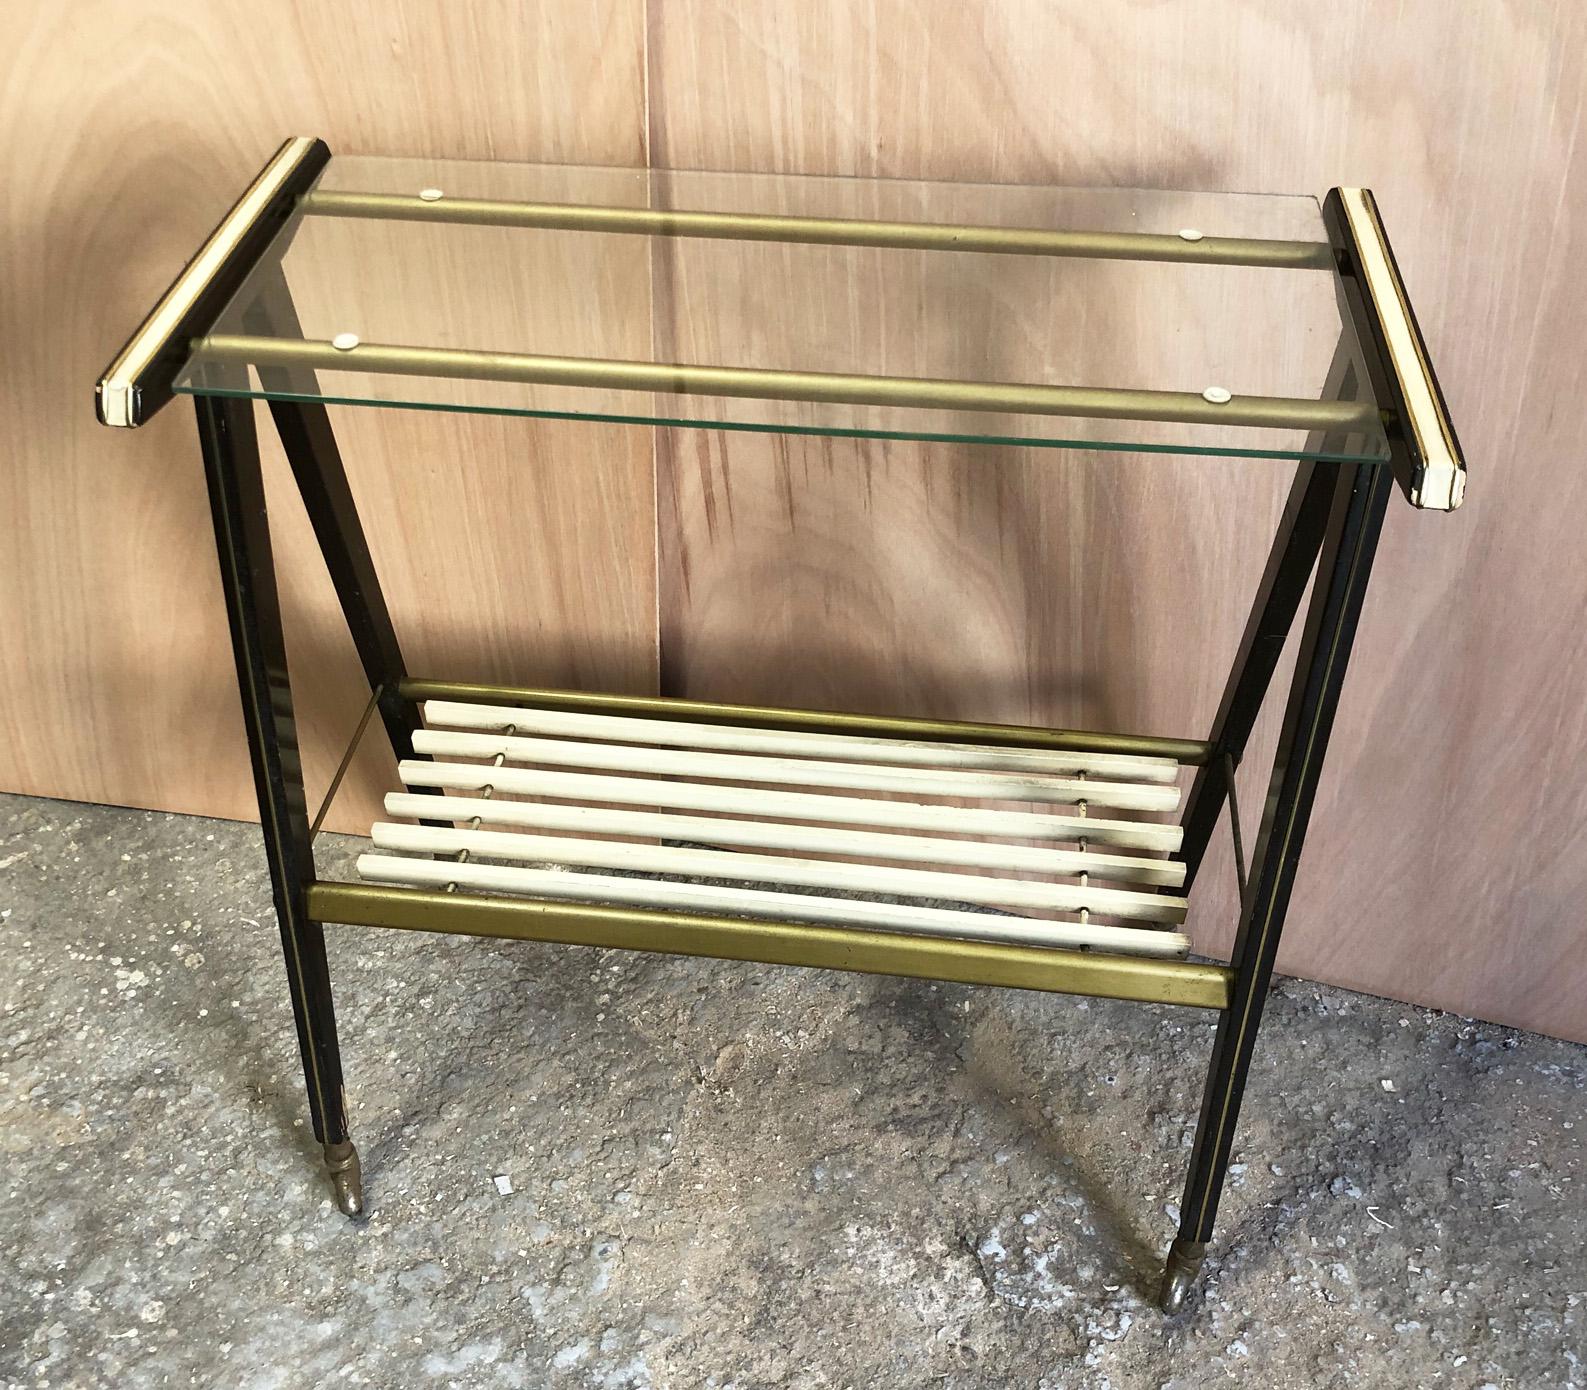 1970 Italian trolley in gold and beech colored aluminum with inserts and wheels.
 Transparent glass top.
 Luxury version of the trolley popular in those years.

To find out the cost of transport to USA etc write a message indicating the delivery